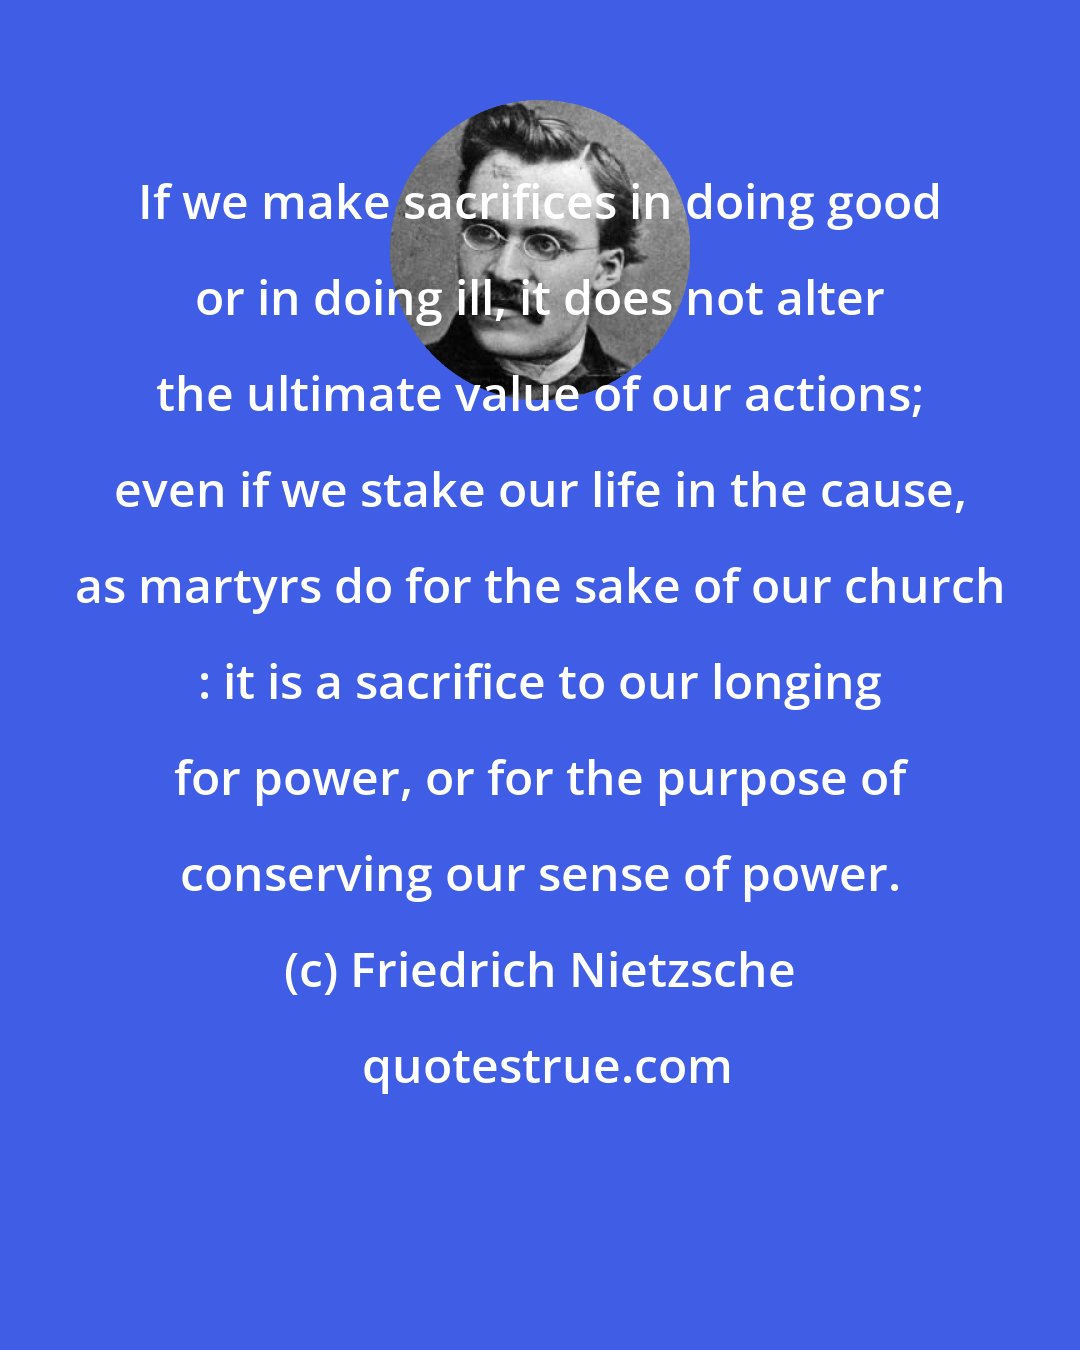 Friedrich Nietzsche: If we make sacrifices in doing good or in doing ill, it does not alter the ultimate value of our actions; even if we stake our life in the cause, as martyrs do for the sake of our church : it is a sacrifice to our longing for power, or for the purpose of conserving our sense of power.